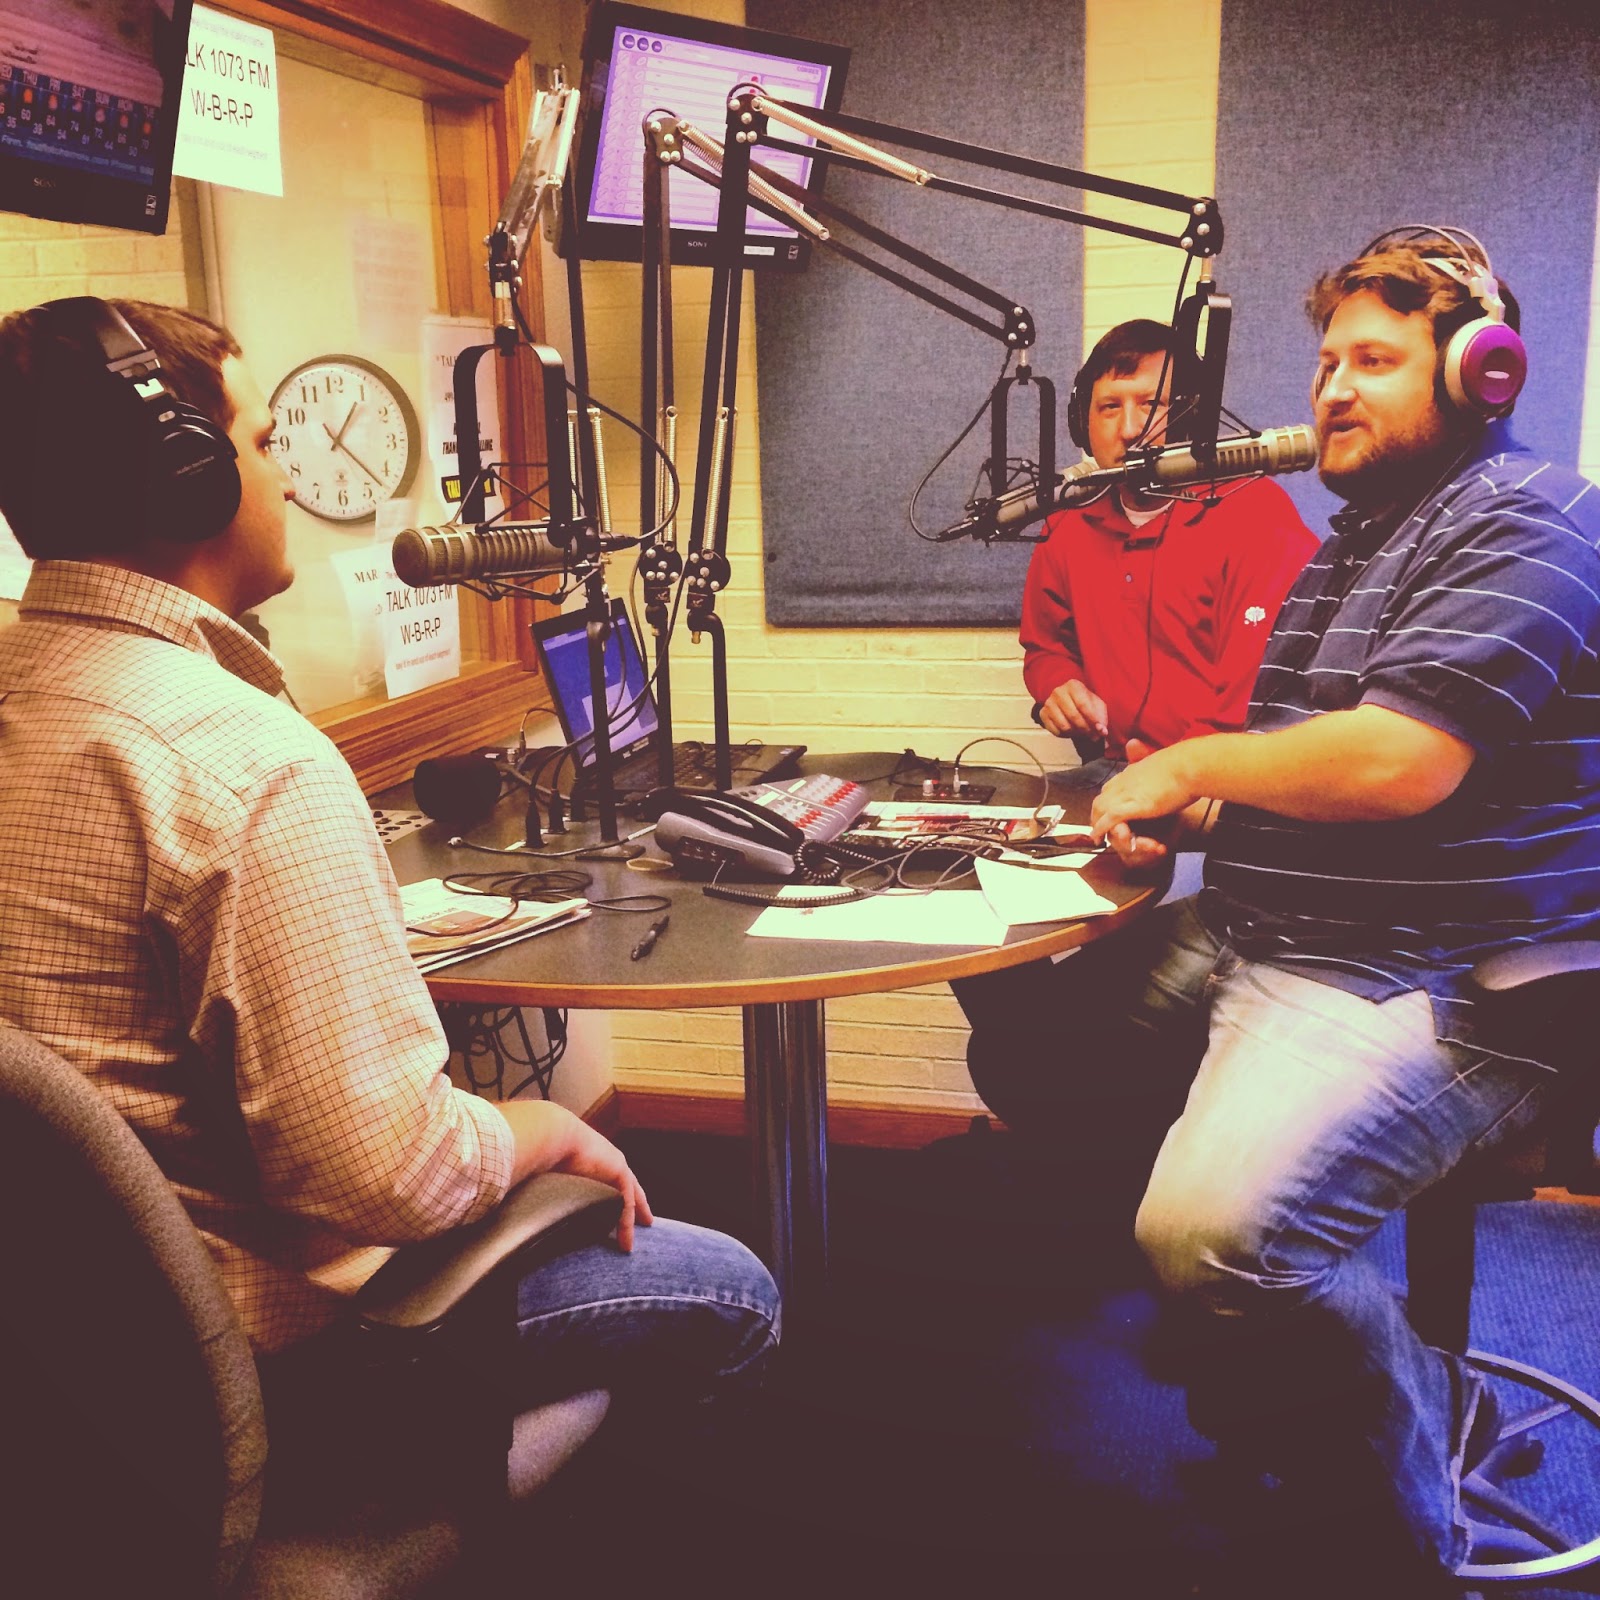 Barrett Miller, Robbie Trahan, and Jay Ducote in Studio at Talk 107.3 FM in Baton Rouge